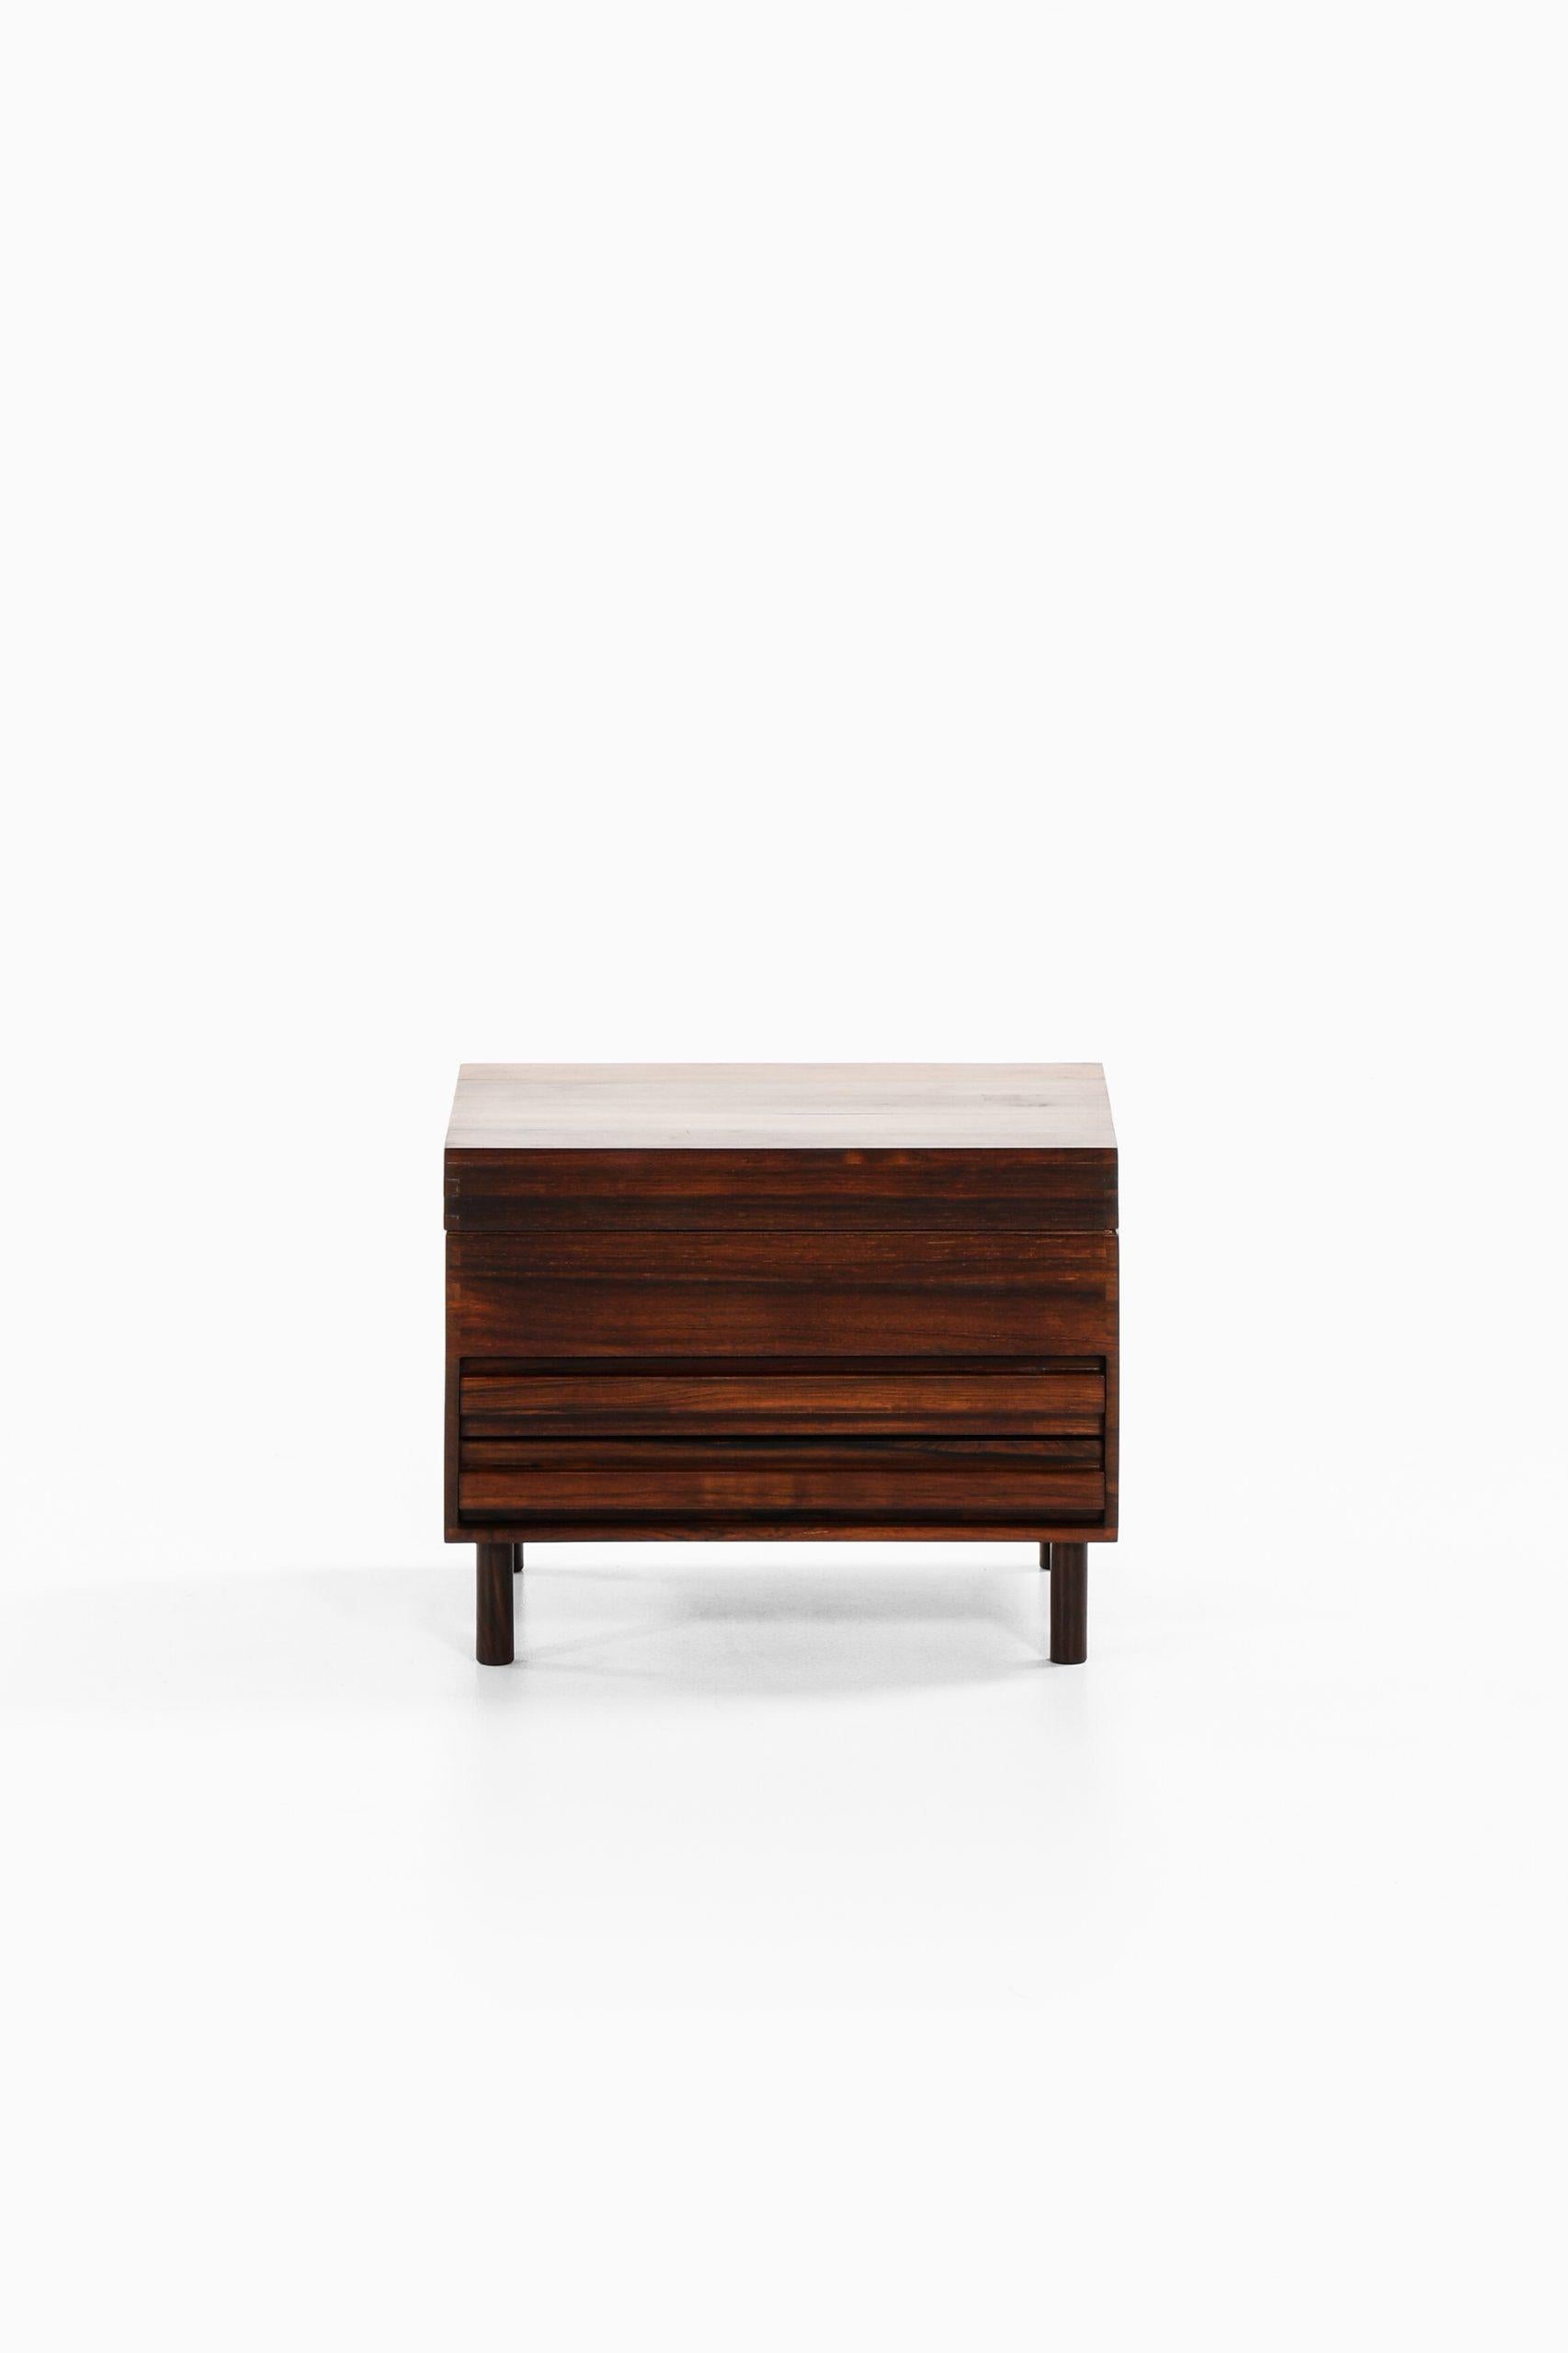 Rare side table and storage box designed by Gunnar Myrstrand. Produced by Källemo in Sweden.